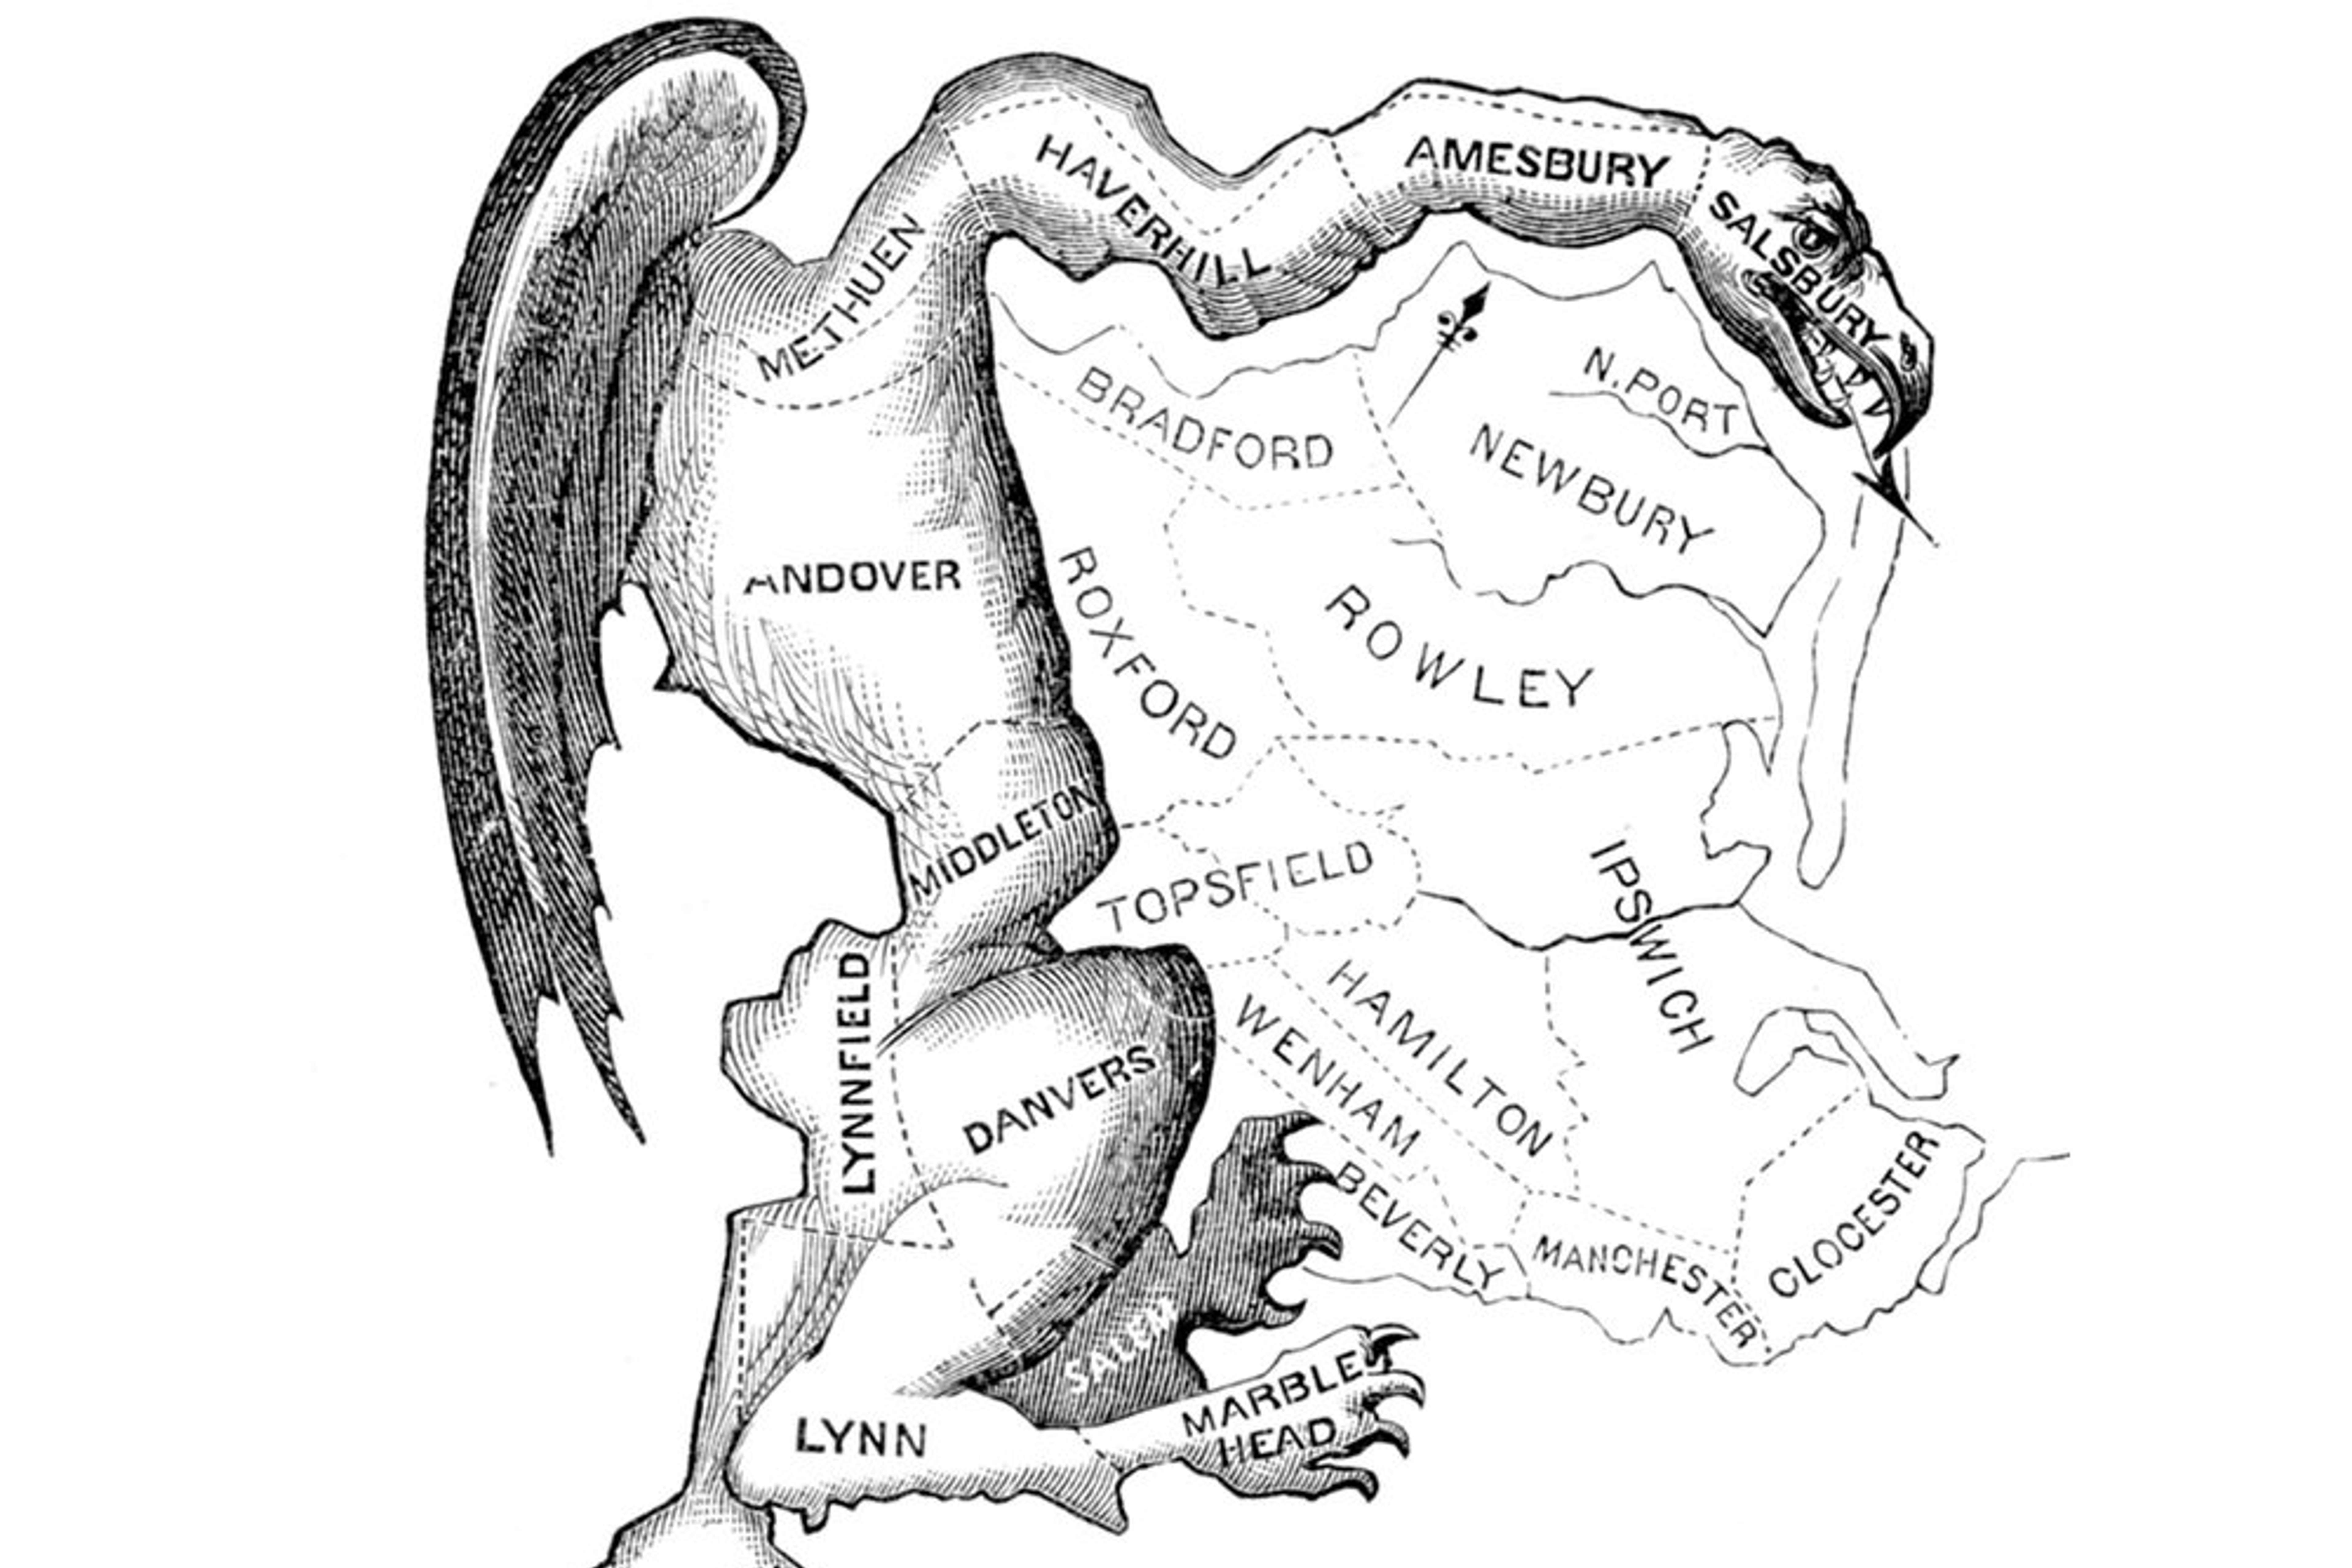 Illustration of a monster created from gerrymandering shapes in England from 1812.